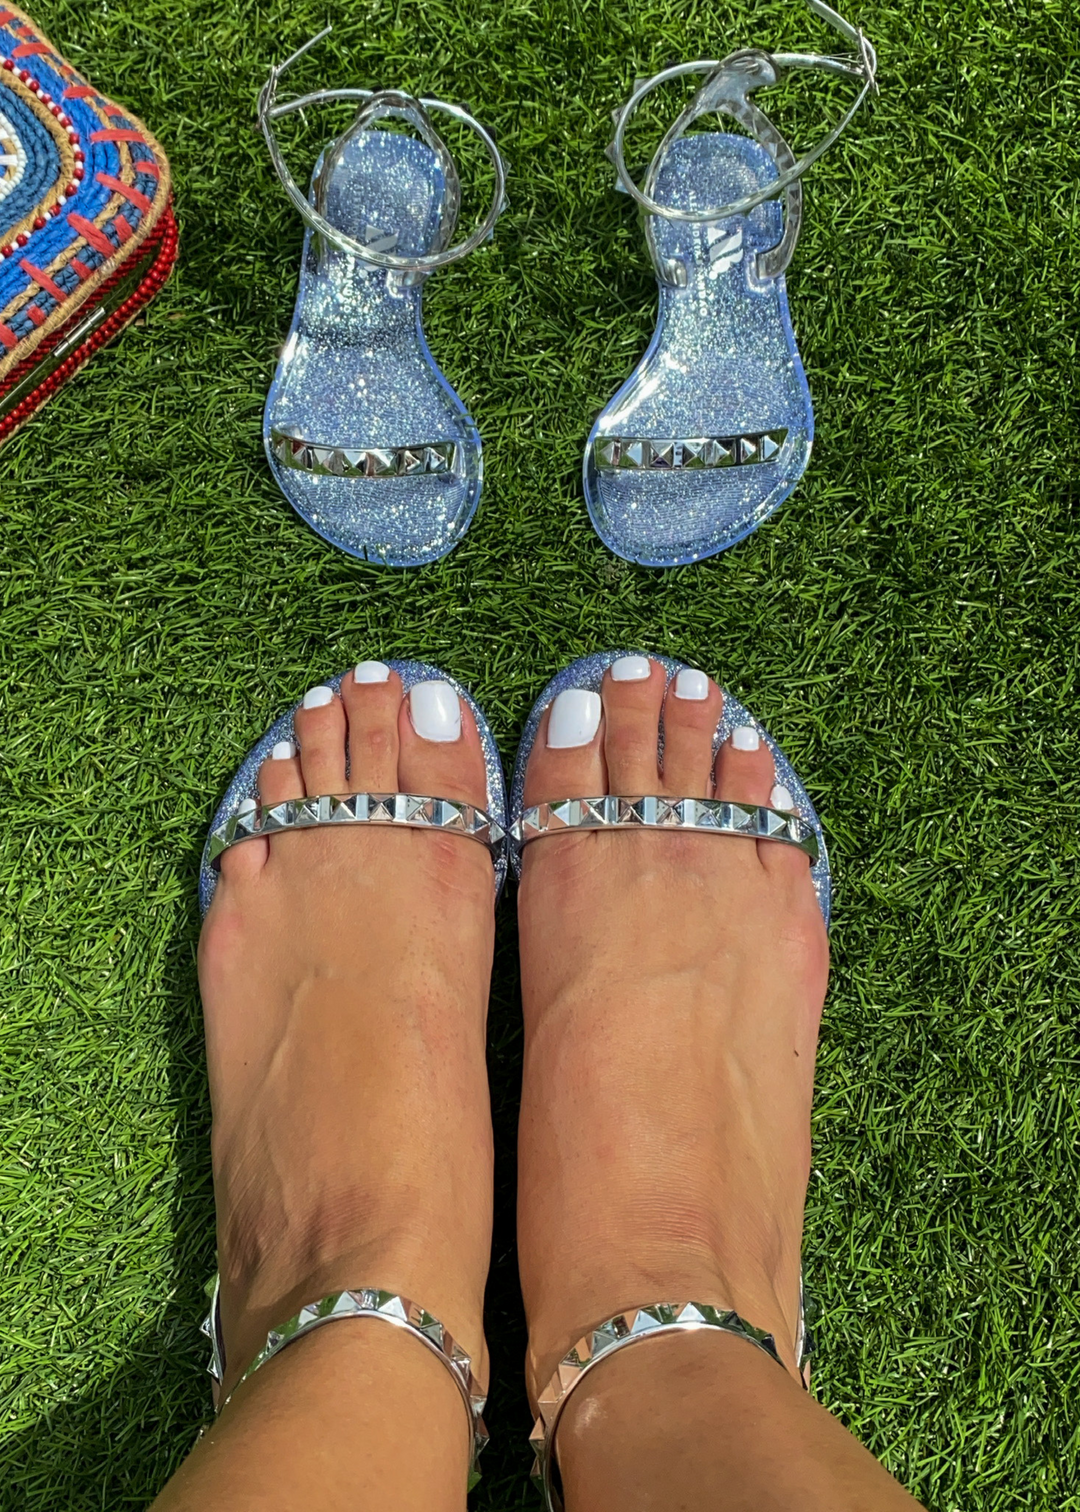 Silver jelly sandals for women and kid's a mommy and me matching shoe sandals.